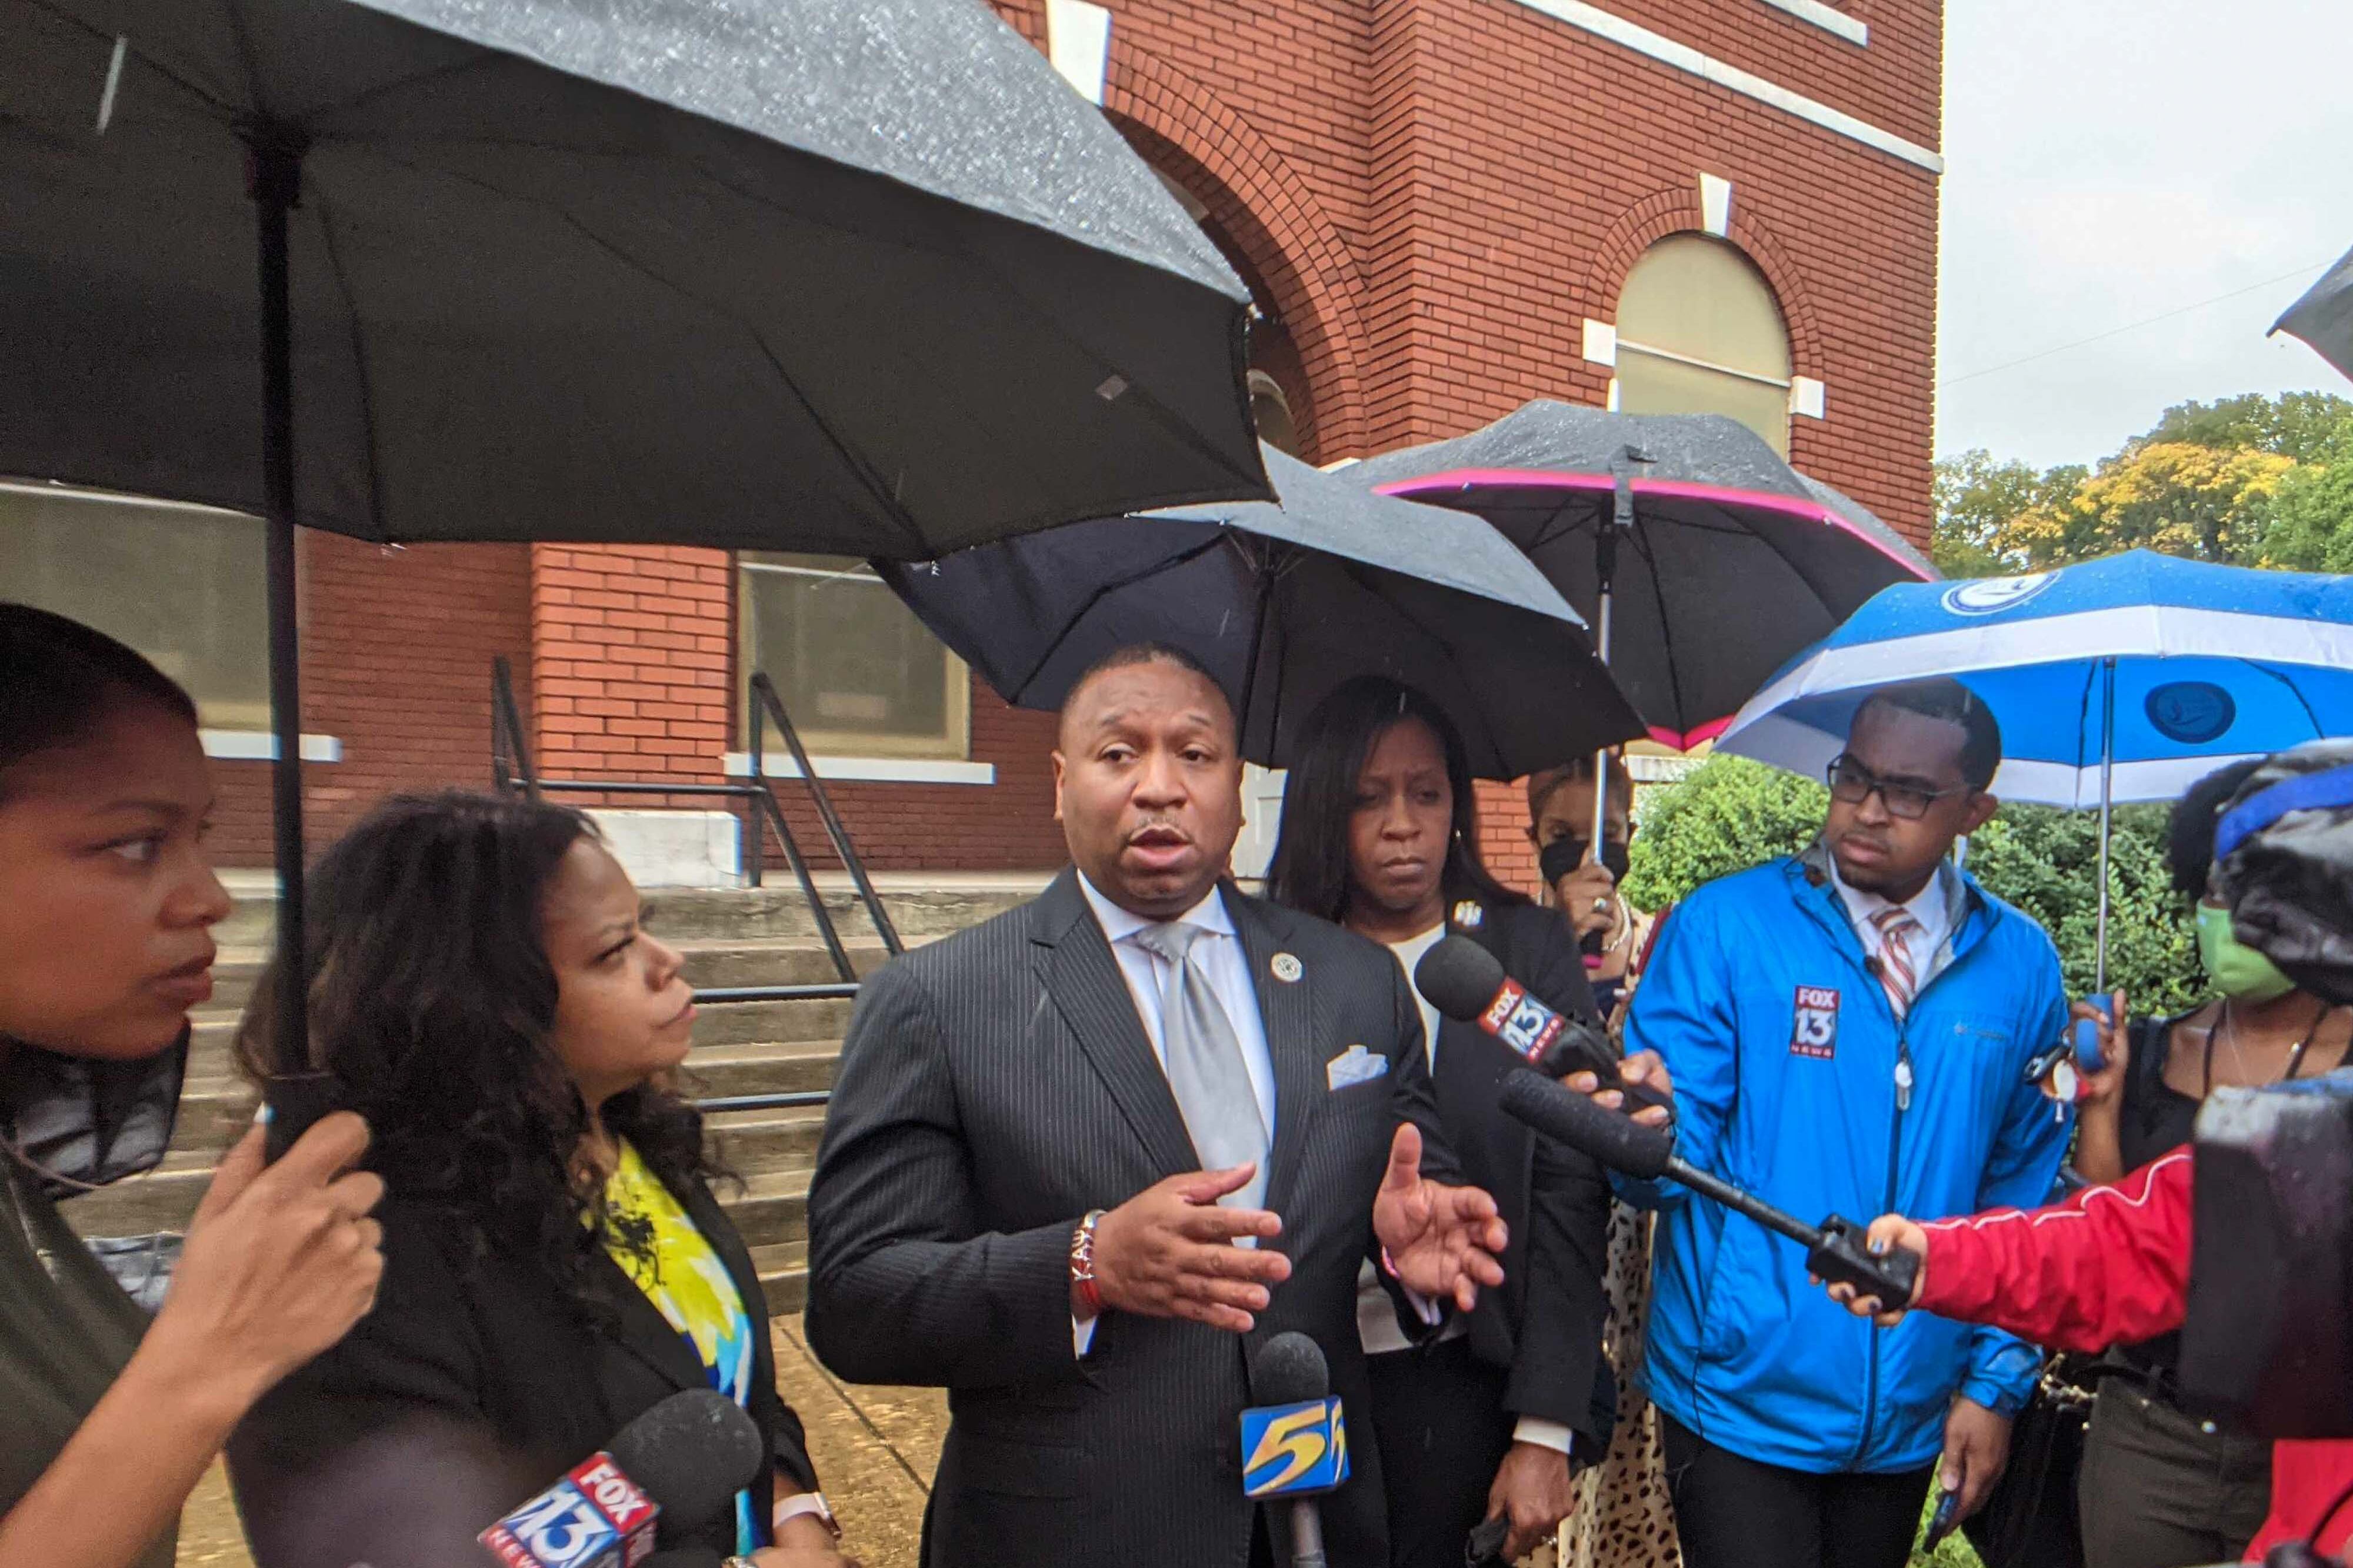 Shelby County Schools Superintendent Joris Ray speaks with members of the press outside of Metropolitan Baptist Church.